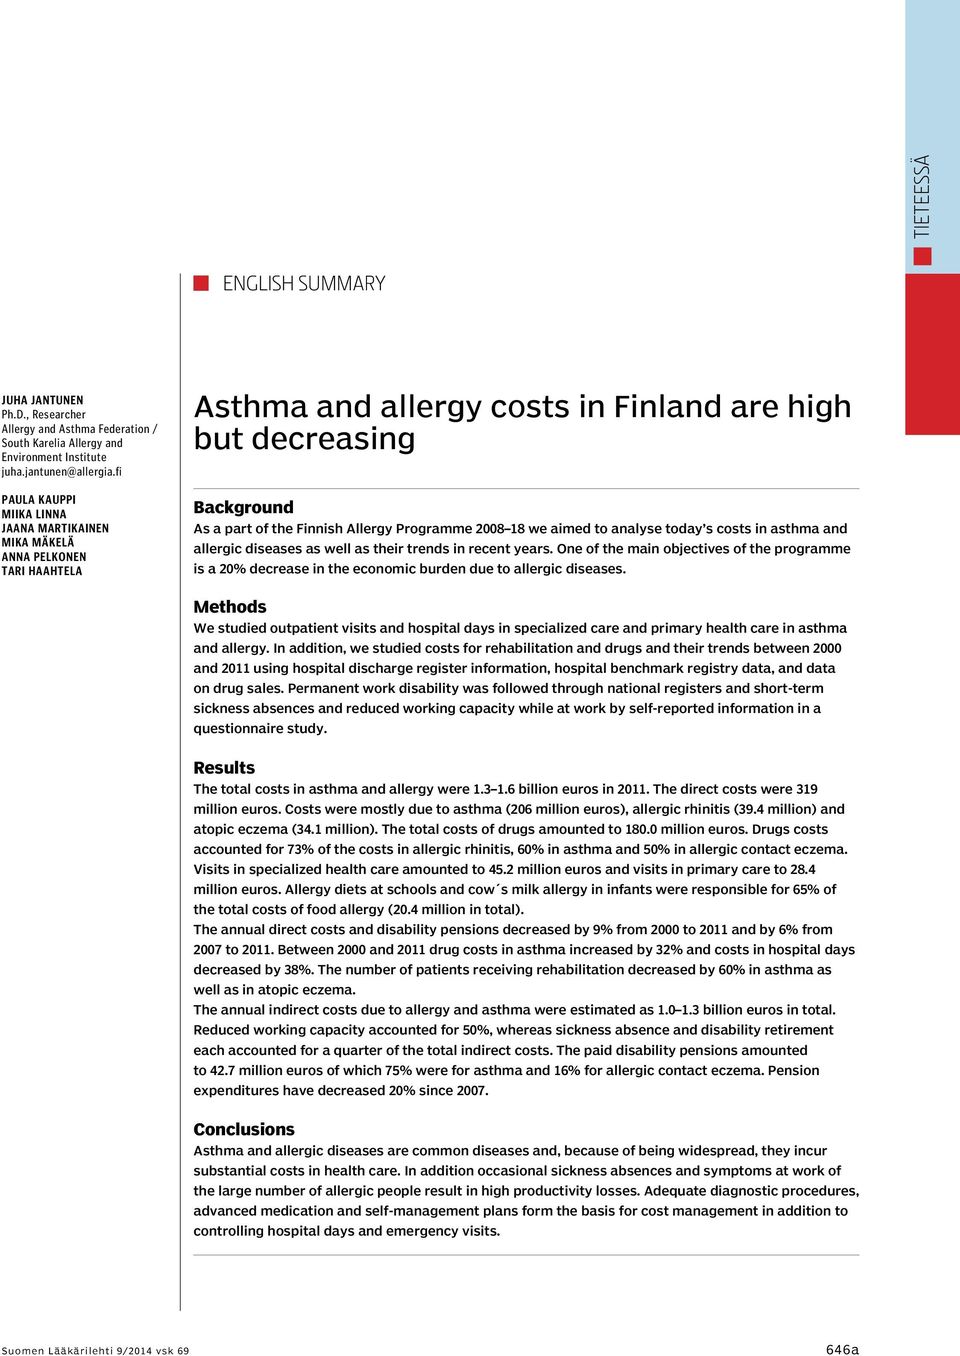 2008 18 we aimed to analyse today s costs in asthma and allergic diseases as well as their trends in recent years.